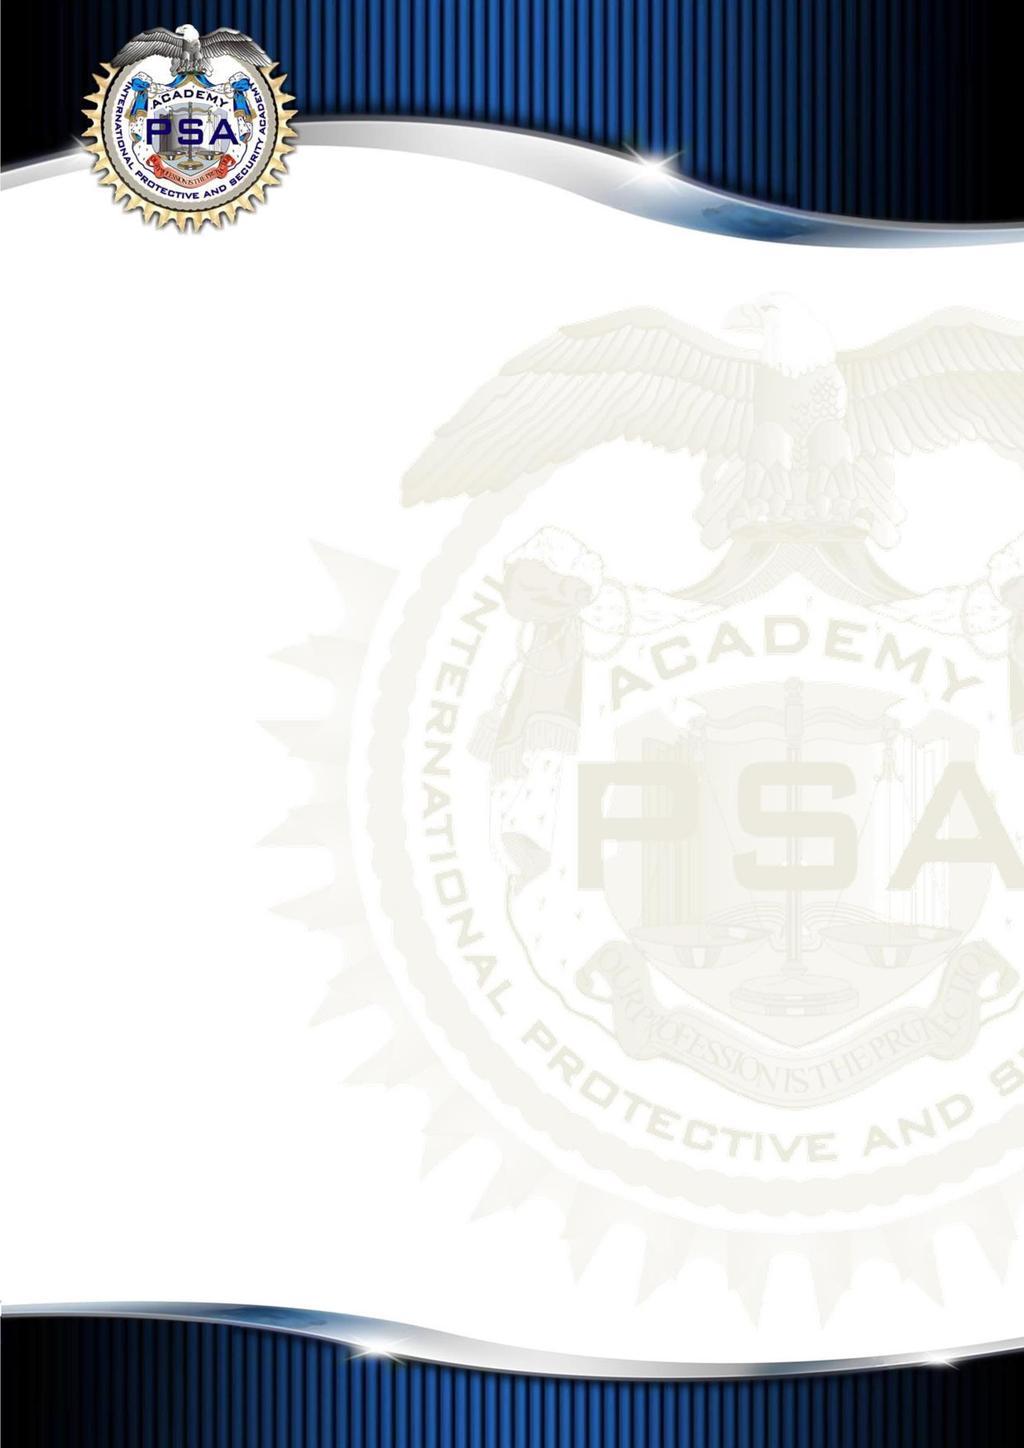 Assault Rifle Modul / Basic Level The PSA-Academy's PSA firearms training Program is provided mainly in Europe in the ex-eastern block countries because of the difficulties of the British Laws, but